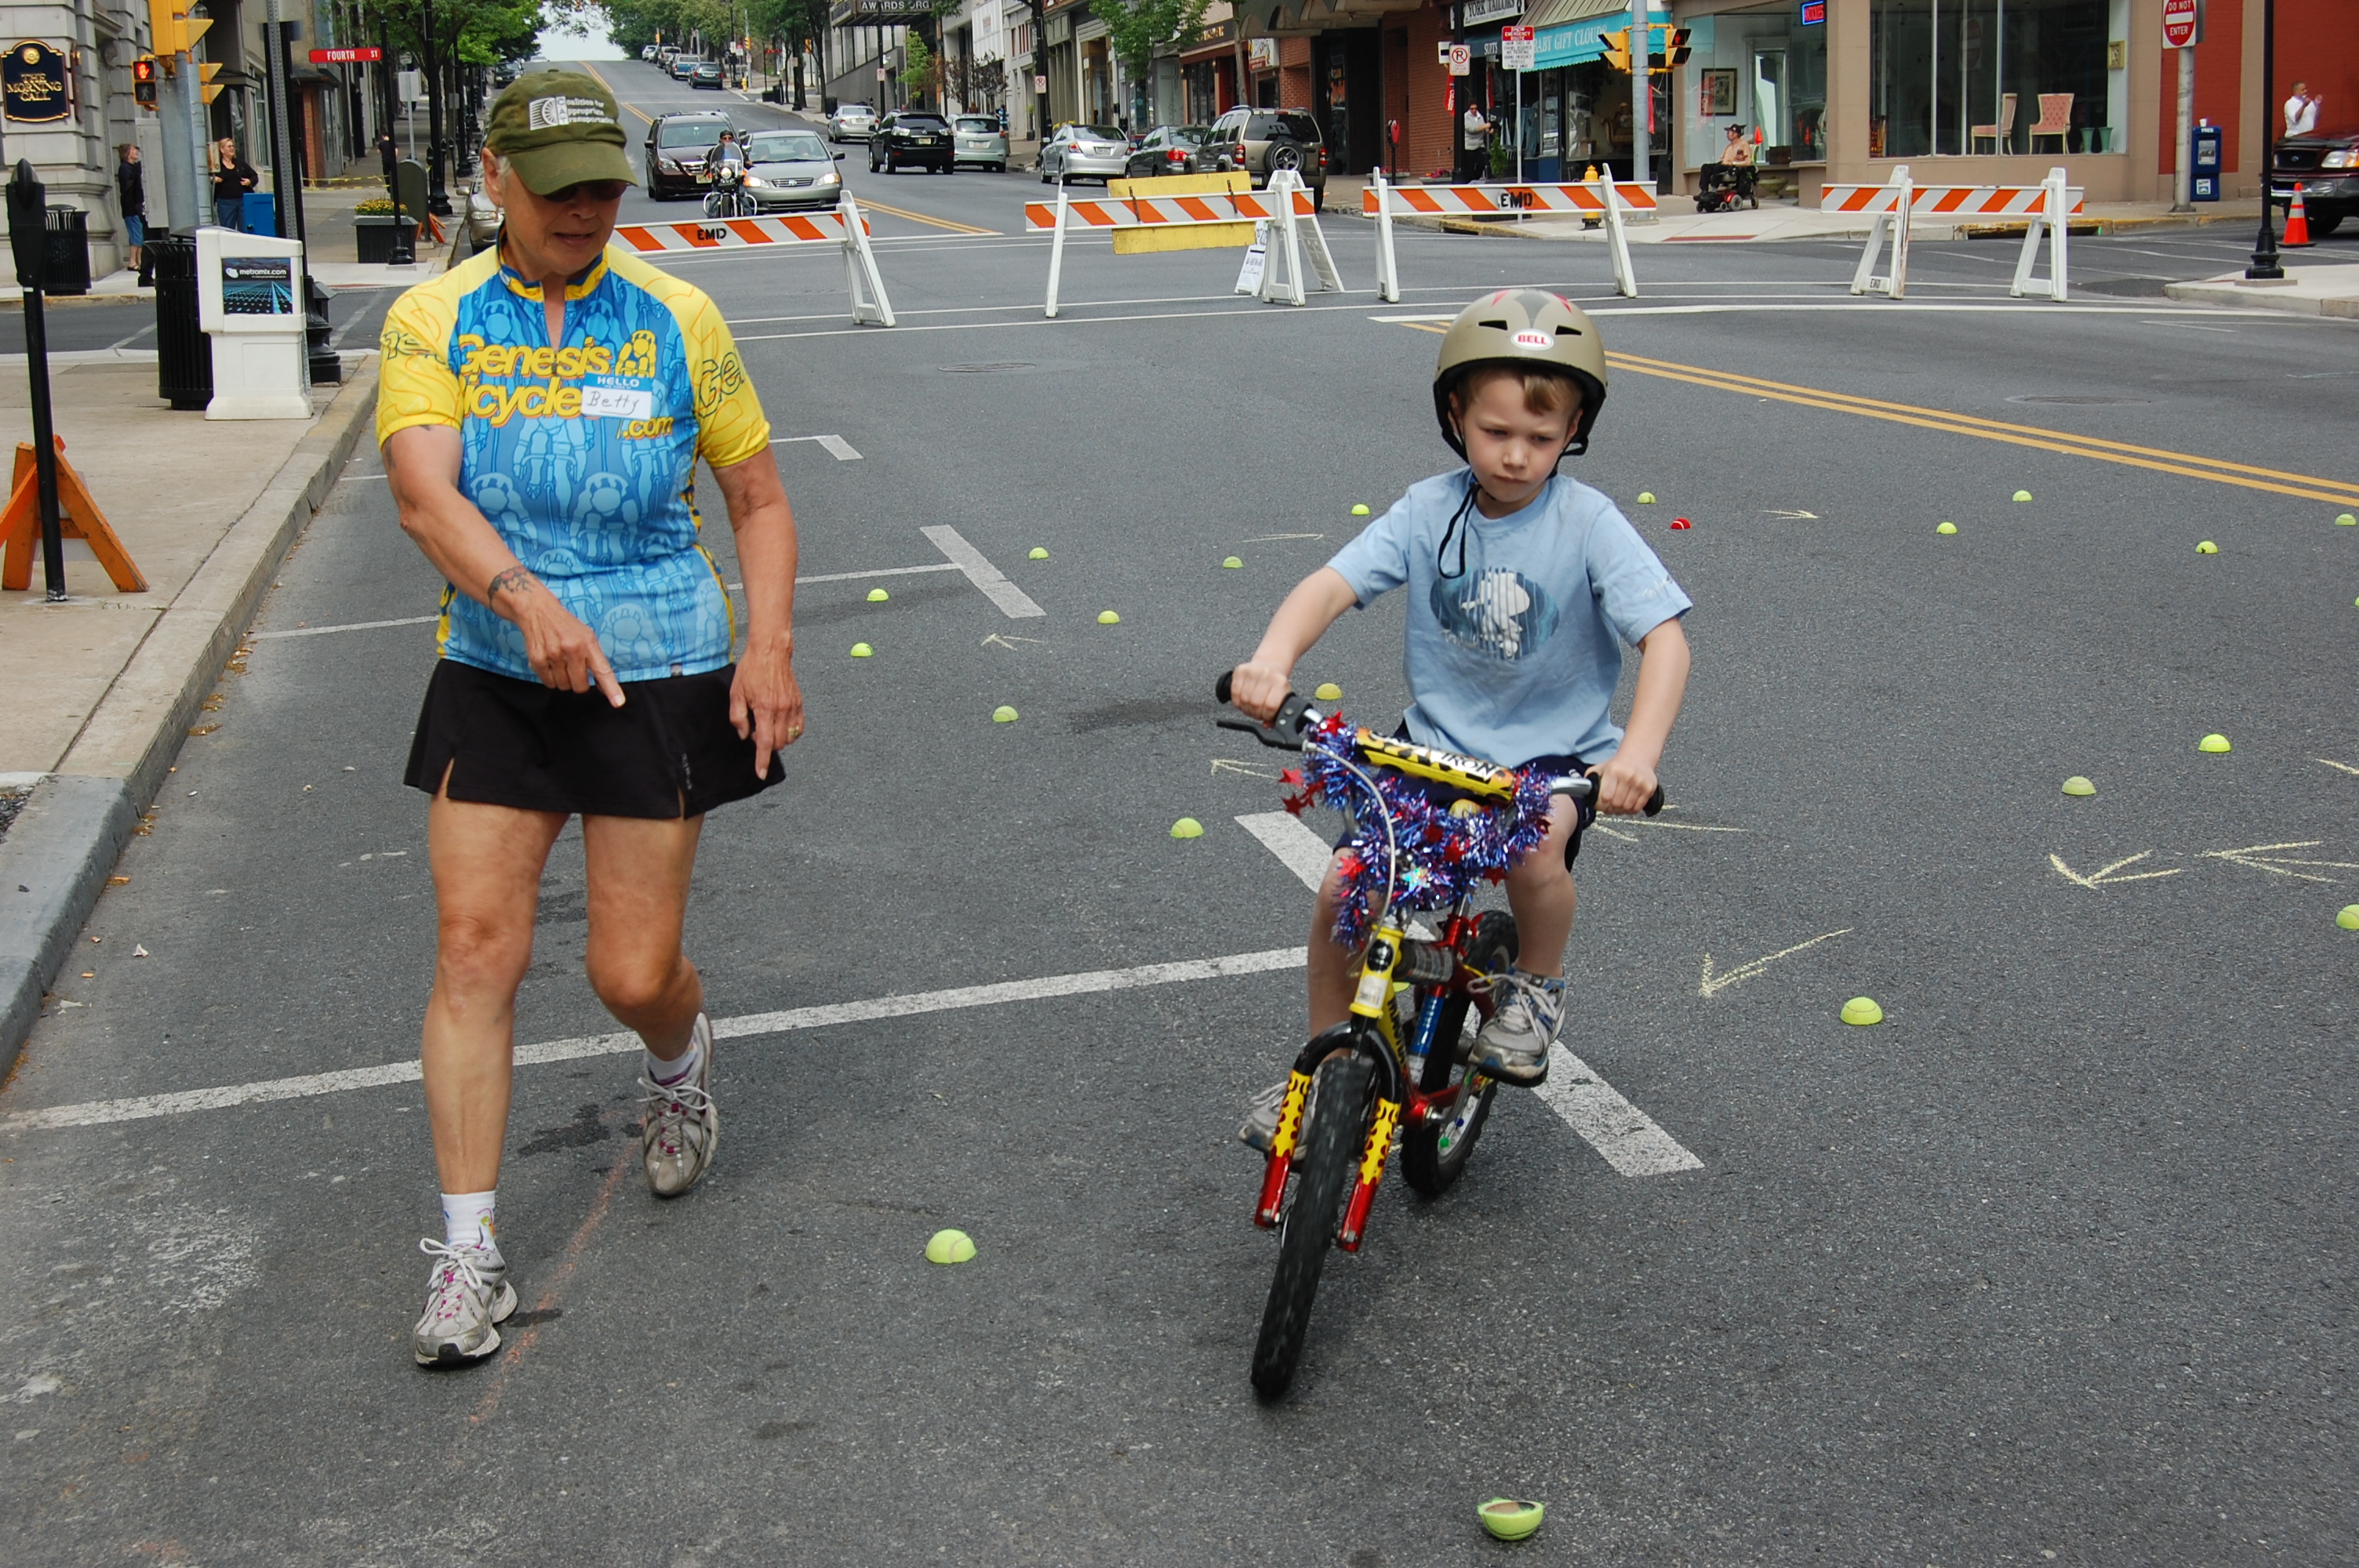 Why is children’s bicycle education important?